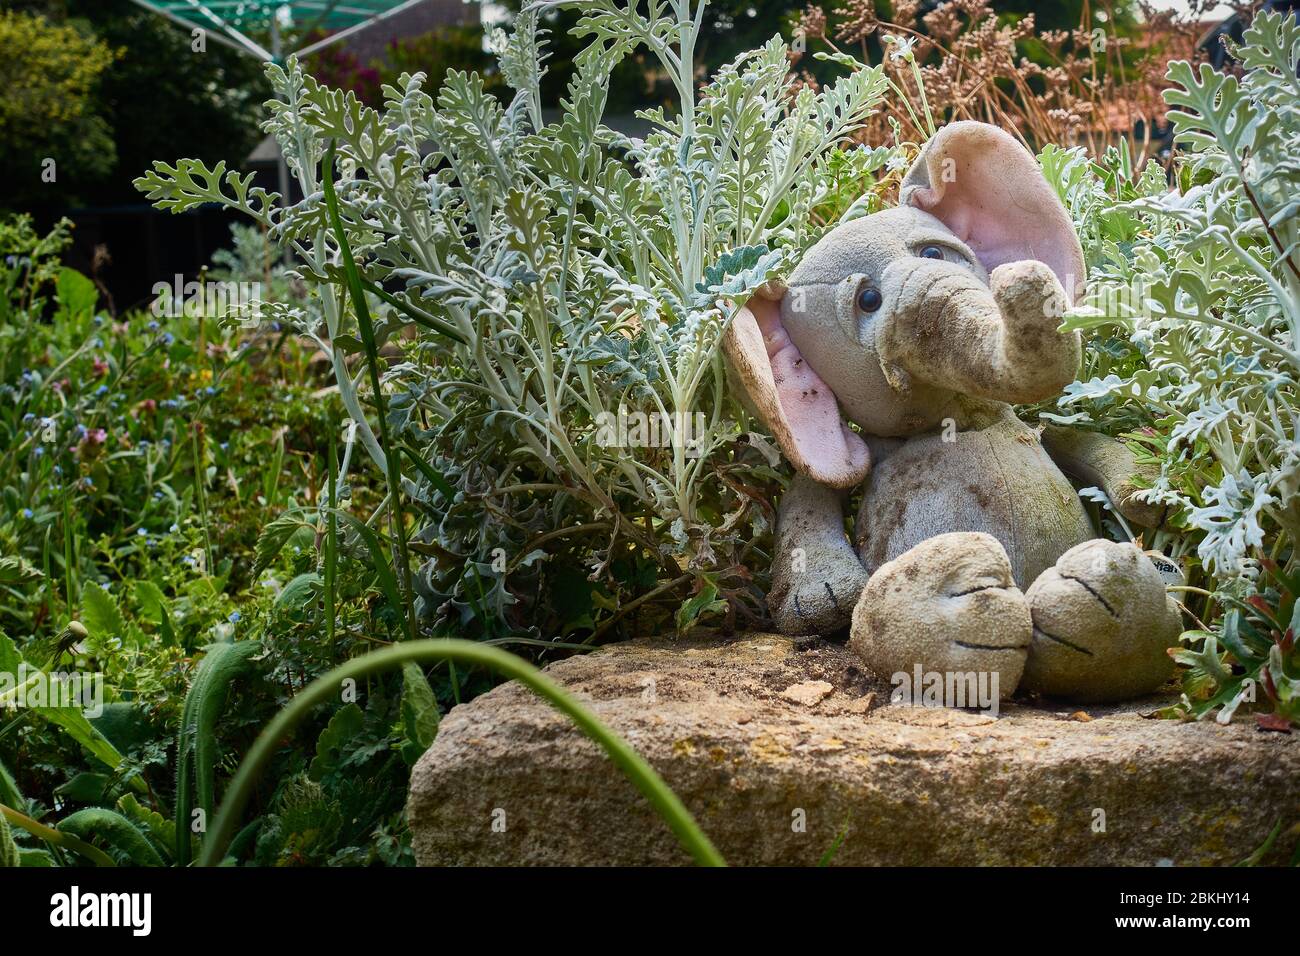 Sad lonely cuddly toy elephant abandoned amongst plants sitting on a rock in a neglected garden looking forlornly upwards Stock Photo